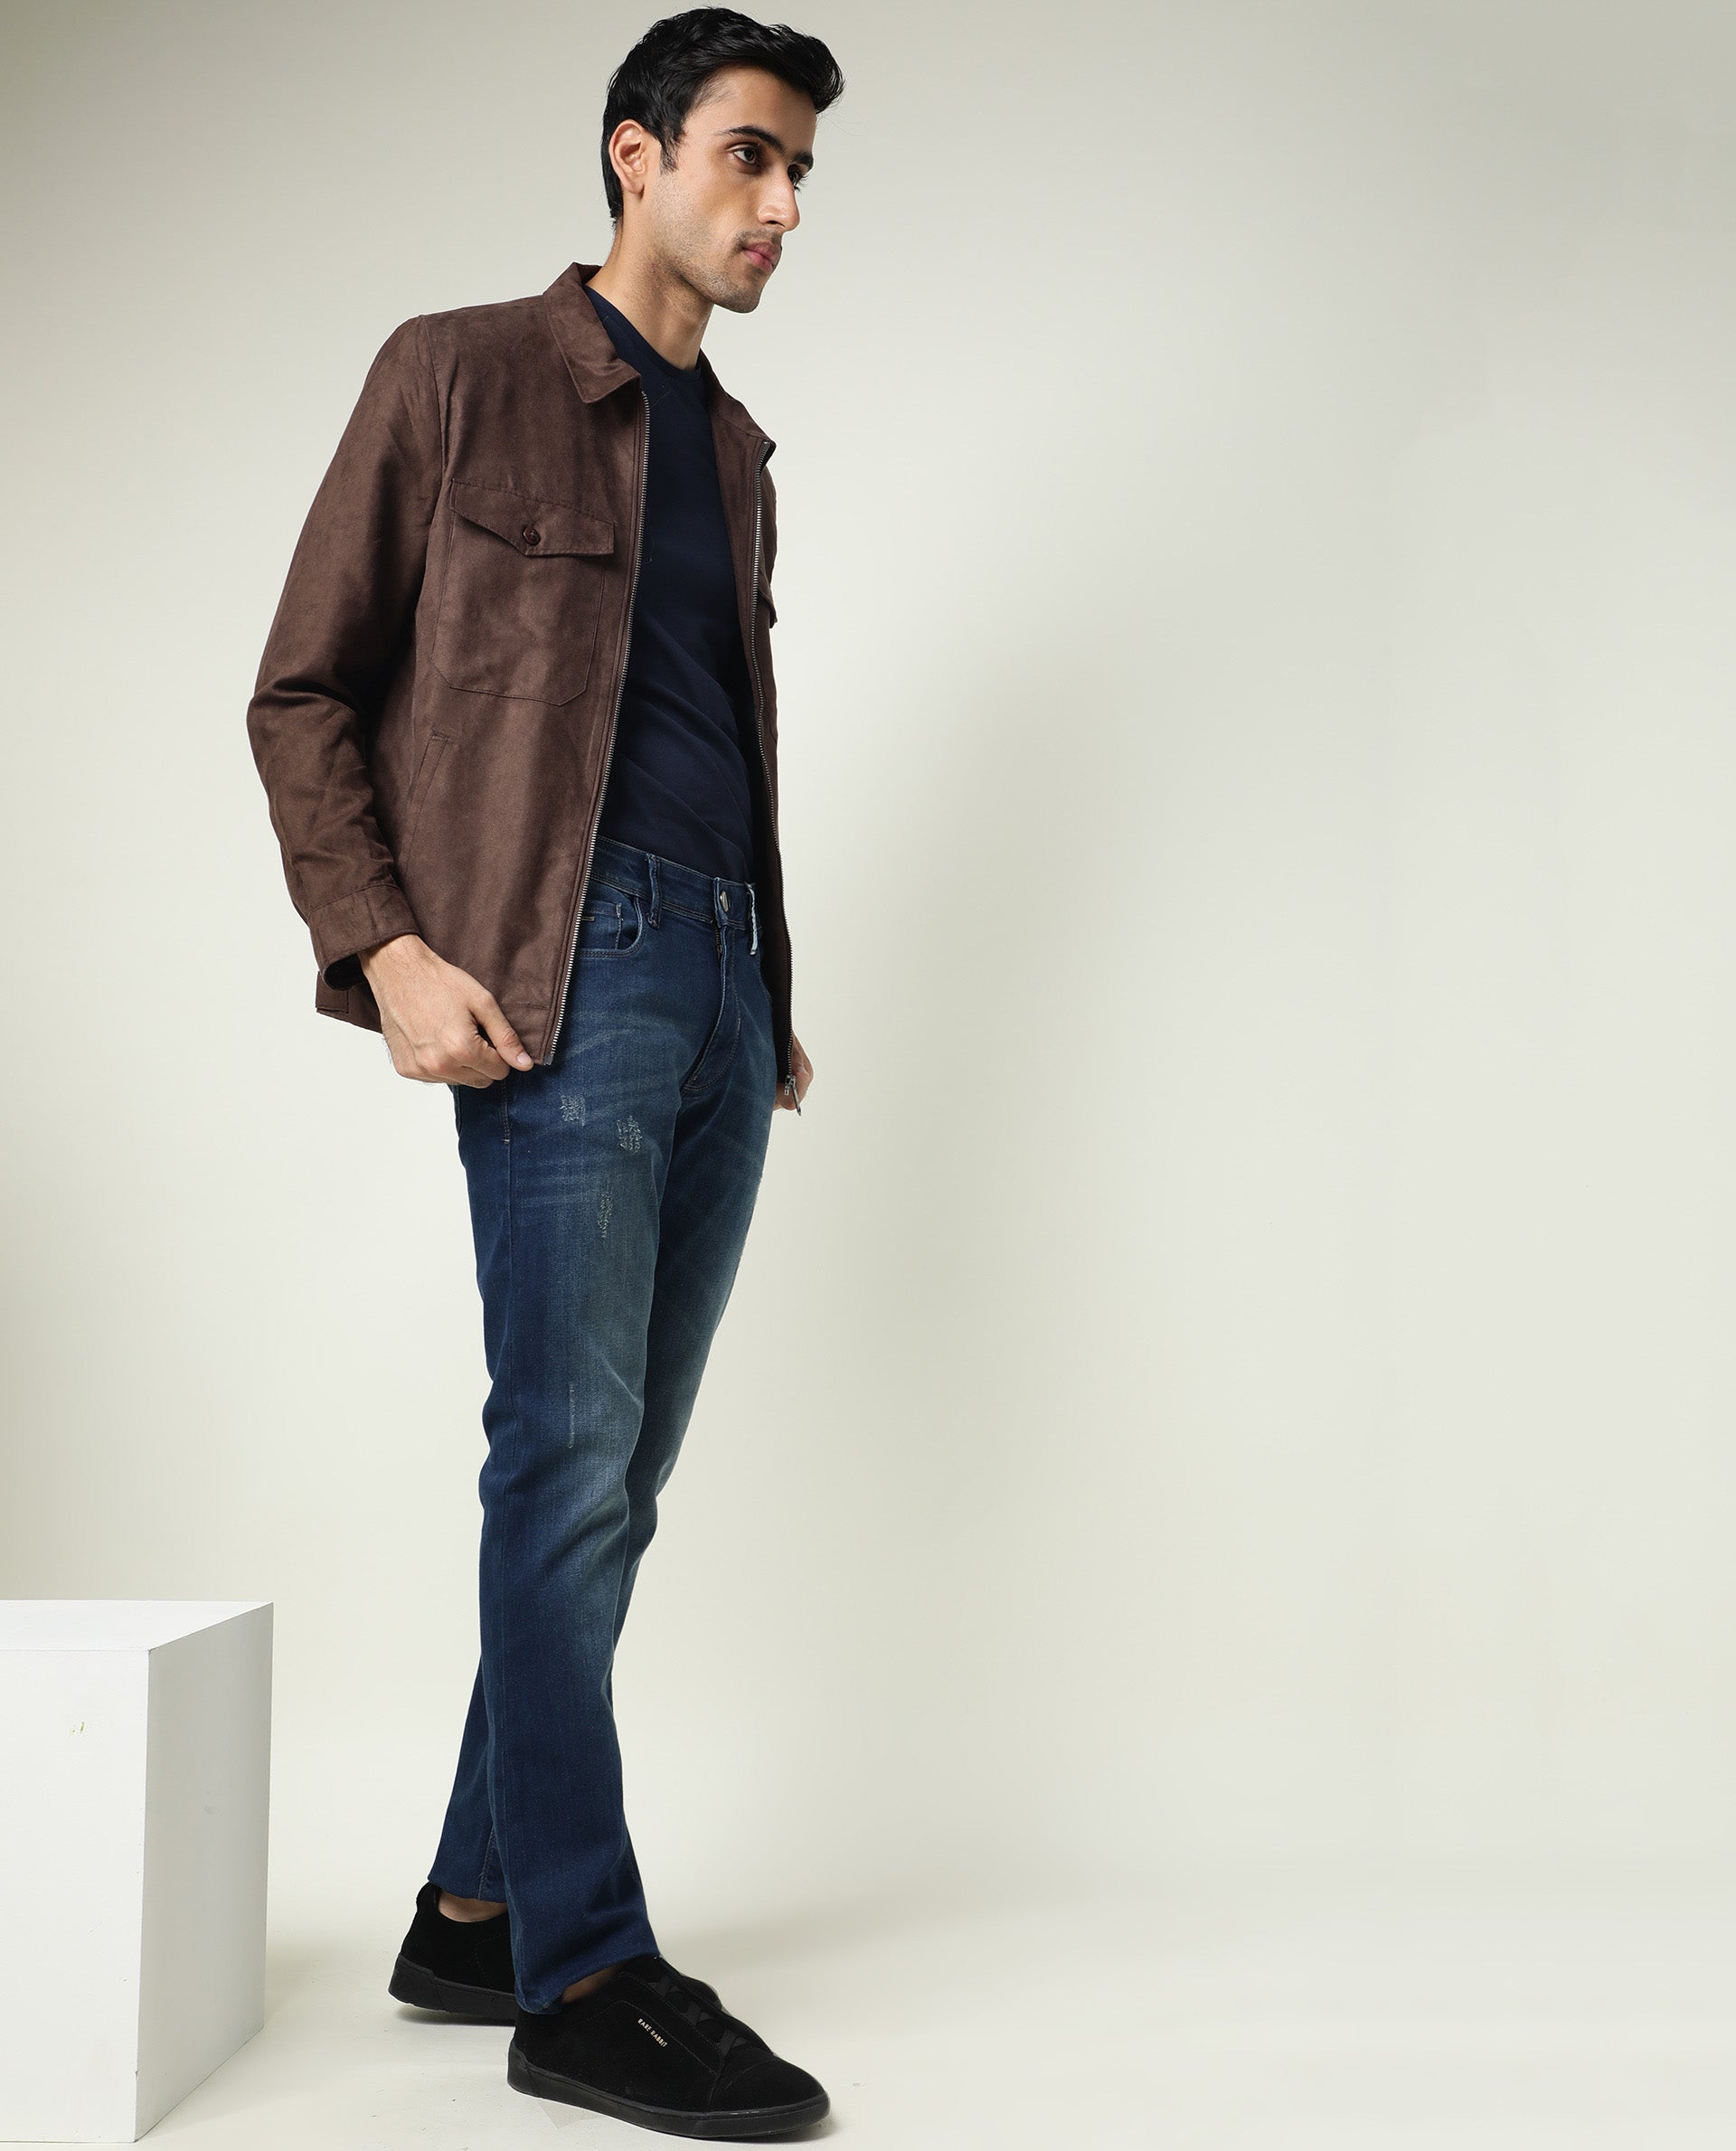 VTMNTS Convertible Leather and Denim Jacket - Brown | Garmentory